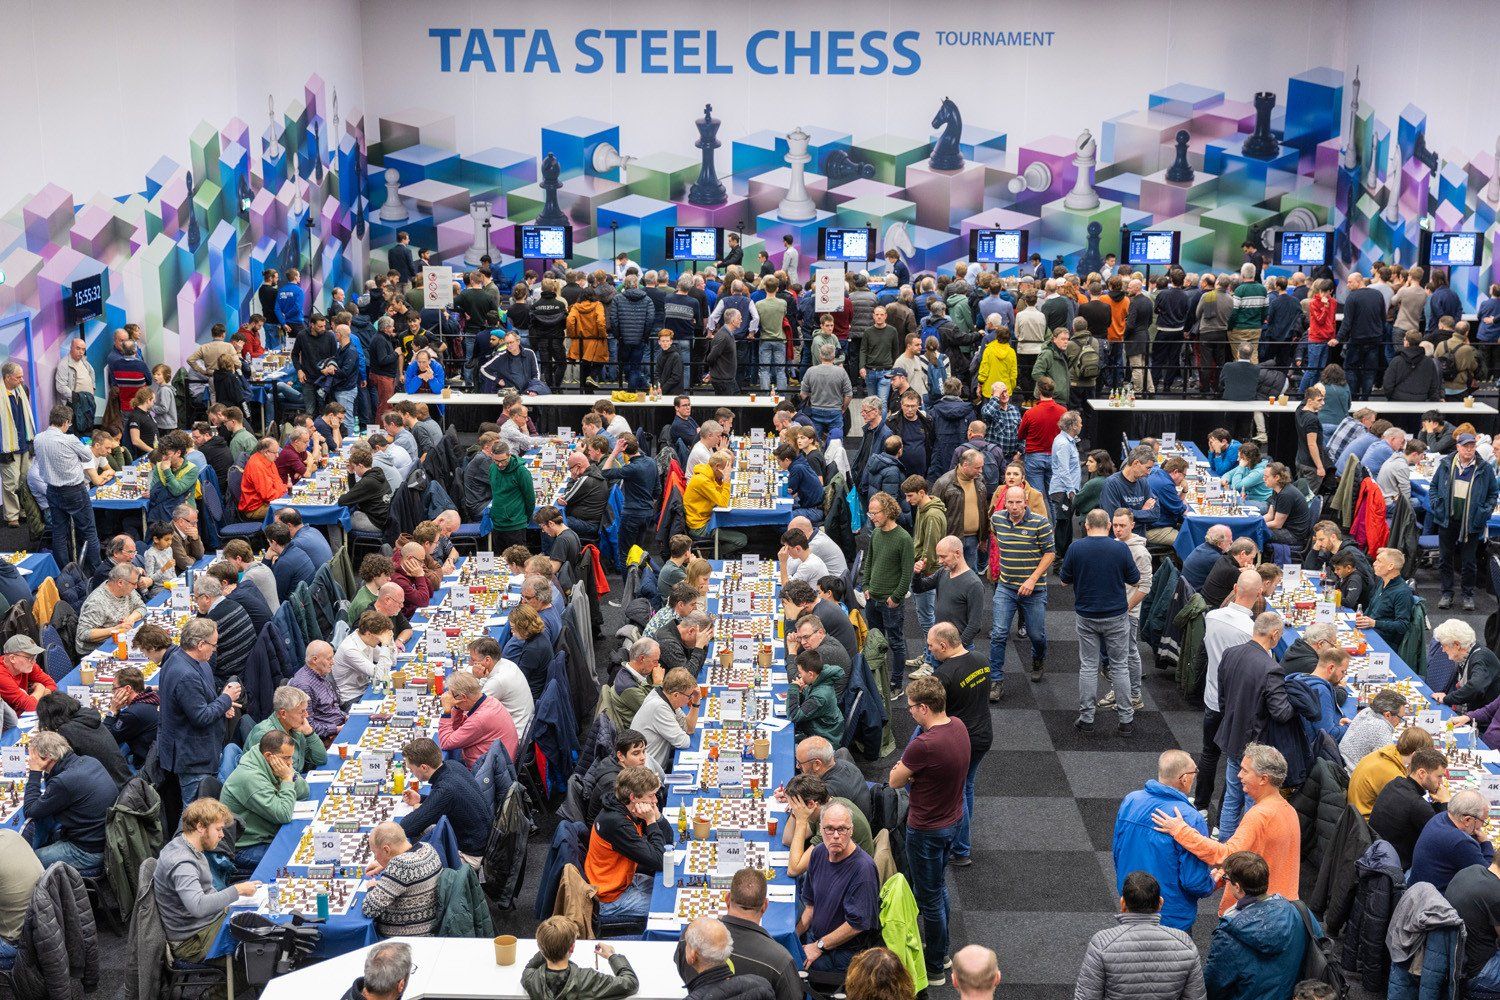 Tata Steel Chess Round 1: Viswanathan Anand off the mark with a